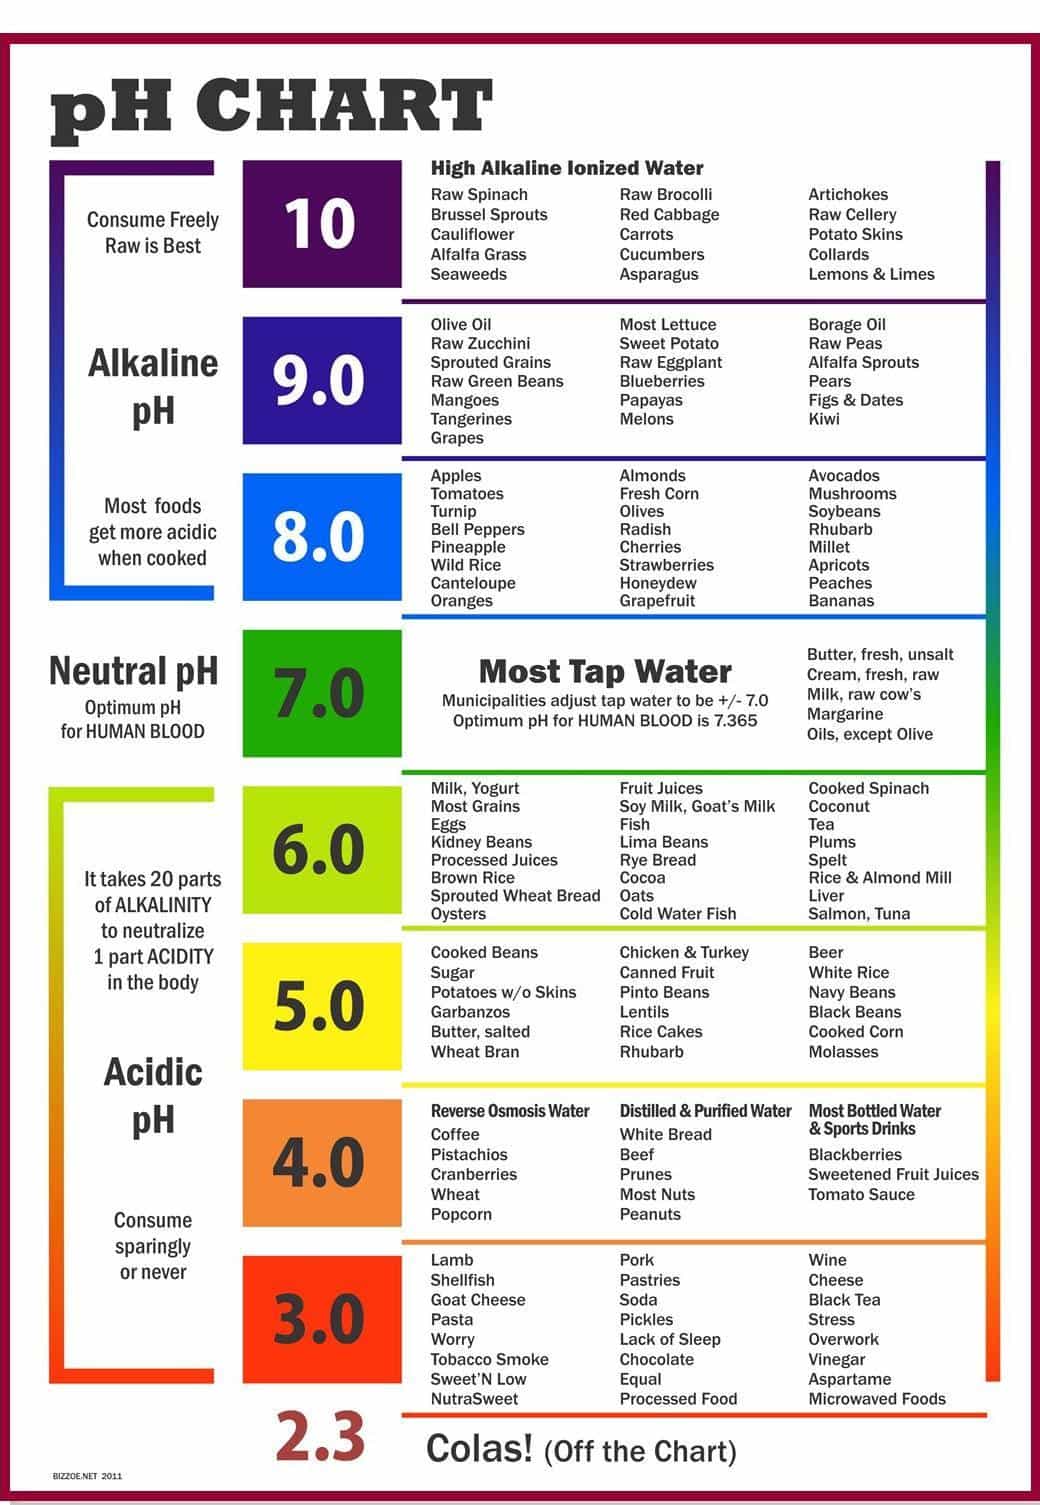 An alkaline diet for balanced human body pH level to improve health